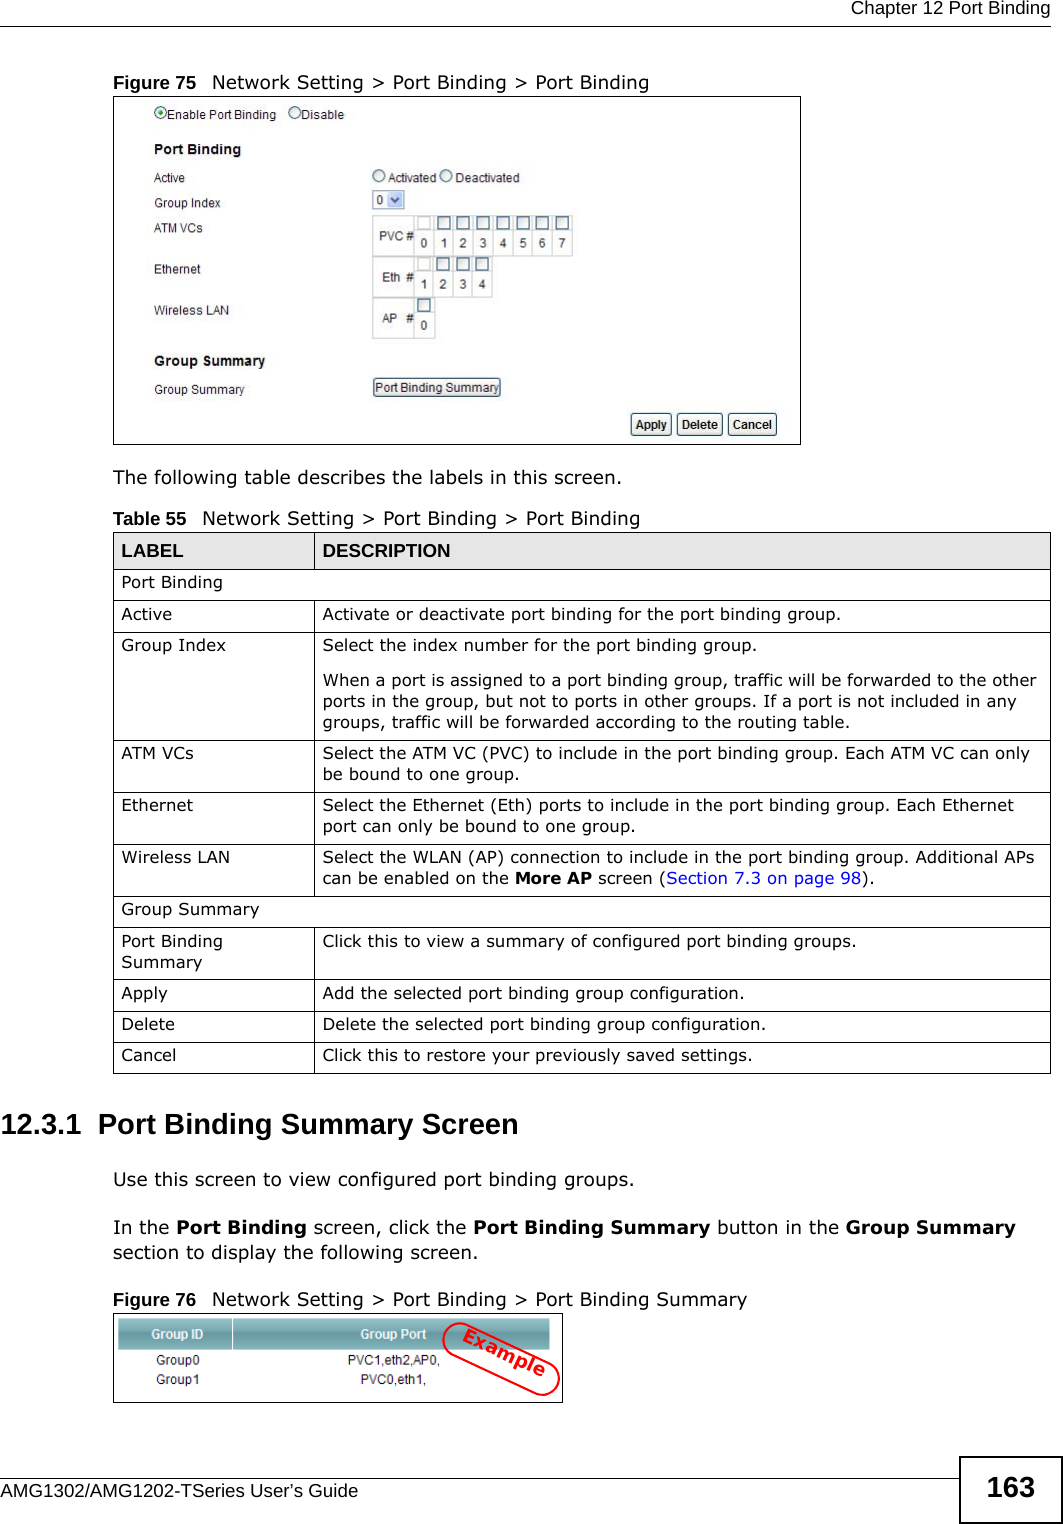  Chapter 12 Port BindingAMG1302/AMG1202-TSeries User’s Guide 163Figure 75   Network Setting &gt; Port Binding &gt; Port BindingThe following table describes the labels in this screen. 12.3.1  Port Binding Summary ScreenUse this screen to view configured port binding groups.In the Port Binding screen, click the Port Binding Summary button in the Group Summary section to display the following screen.Figure 76   Network Setting &gt; Port Binding &gt; Port Binding SummaryTable 55   Network Setting &gt; Port Binding &gt; Port BindingLABEL DESCRIPTIONPort BindingActive Activate or deactivate port binding for the port binding group.Group Index Select the index number for the port binding group. When a port is assigned to a port binding group, traffic will be forwarded to the other ports in the group, but not to ports in other groups. If a port is not included in any groups, traffic will be forwarded according to the routing table.ATM VCs Select the ATM VC (PVC) to include in the port binding group. Each ATM VC can only be bound to one group.Ethernet Select the Ethernet (Eth) ports to include in the port binding group. Each Ethernet port can only be bound to one group.Wireless LAN Select the WLAN (AP) connection to include in the port binding group. Additional APs can be enabled on the More AP screen (Section 7.3 on page 98).Group SummaryPort Binding SummaryClick this to view a summary of configured port binding groups.Apply Add the selected port binding group configuration.Delete Delete the selected port binding group configuration. Cancel Click this to restore your previously saved settings.Example